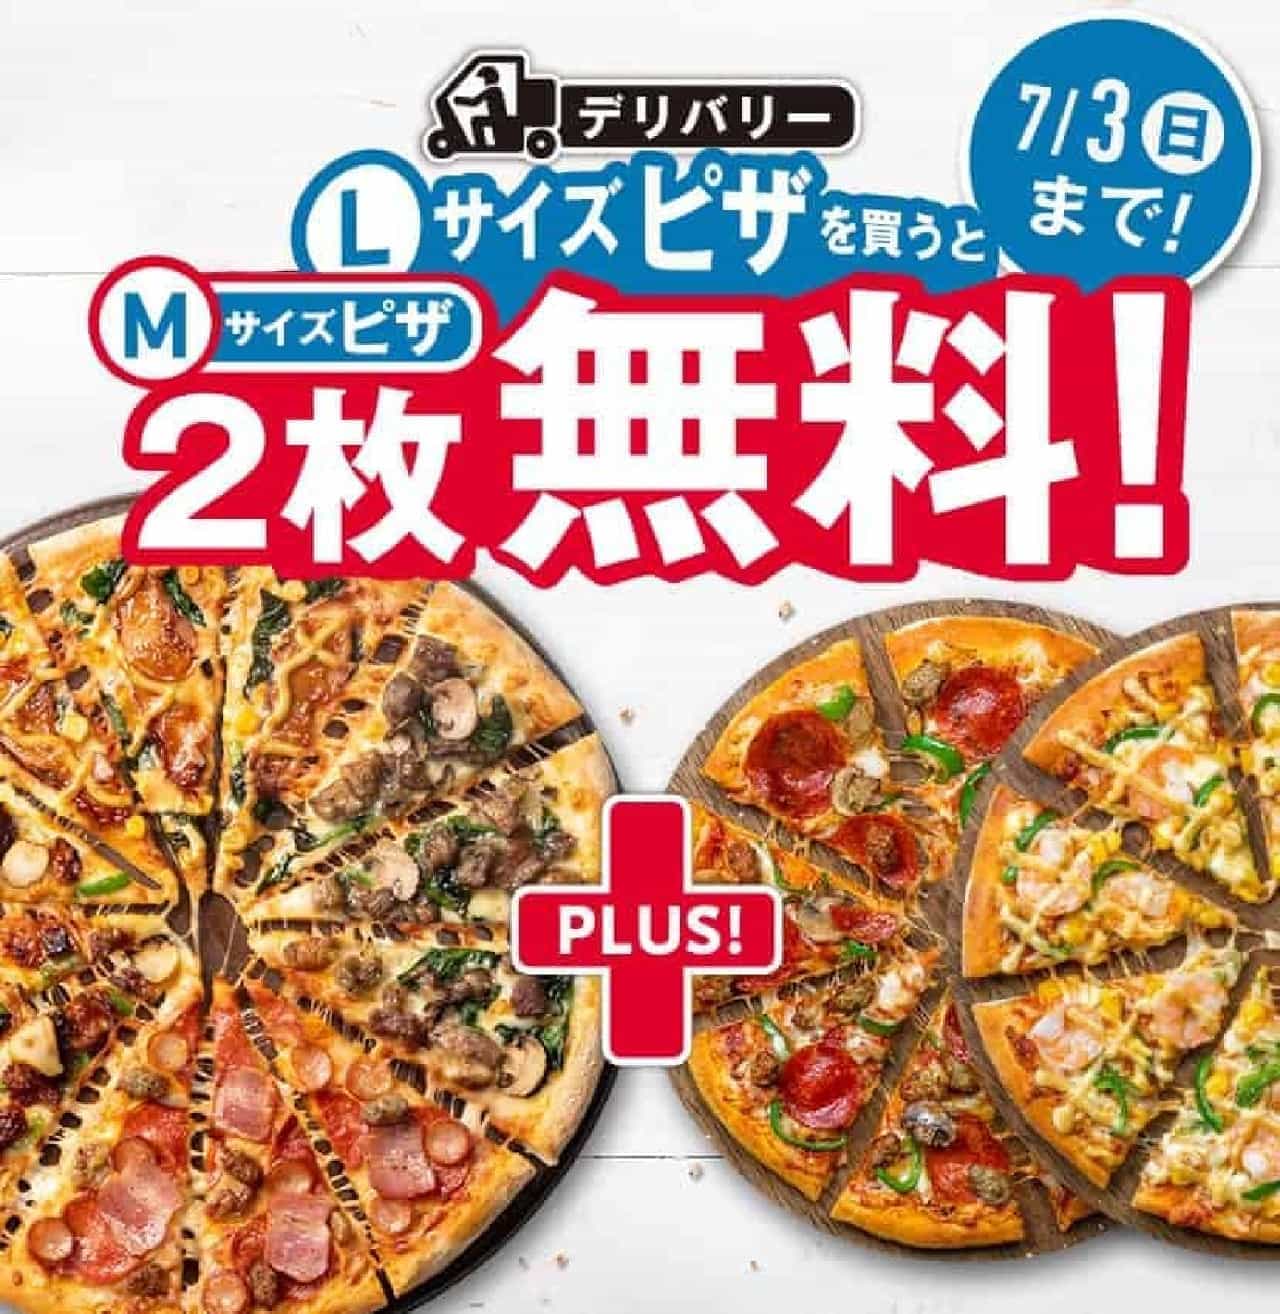 Domino's Pizza "Buy Delivery L Size Pizza, Get 2 M Size Pizzas Free! Campaign